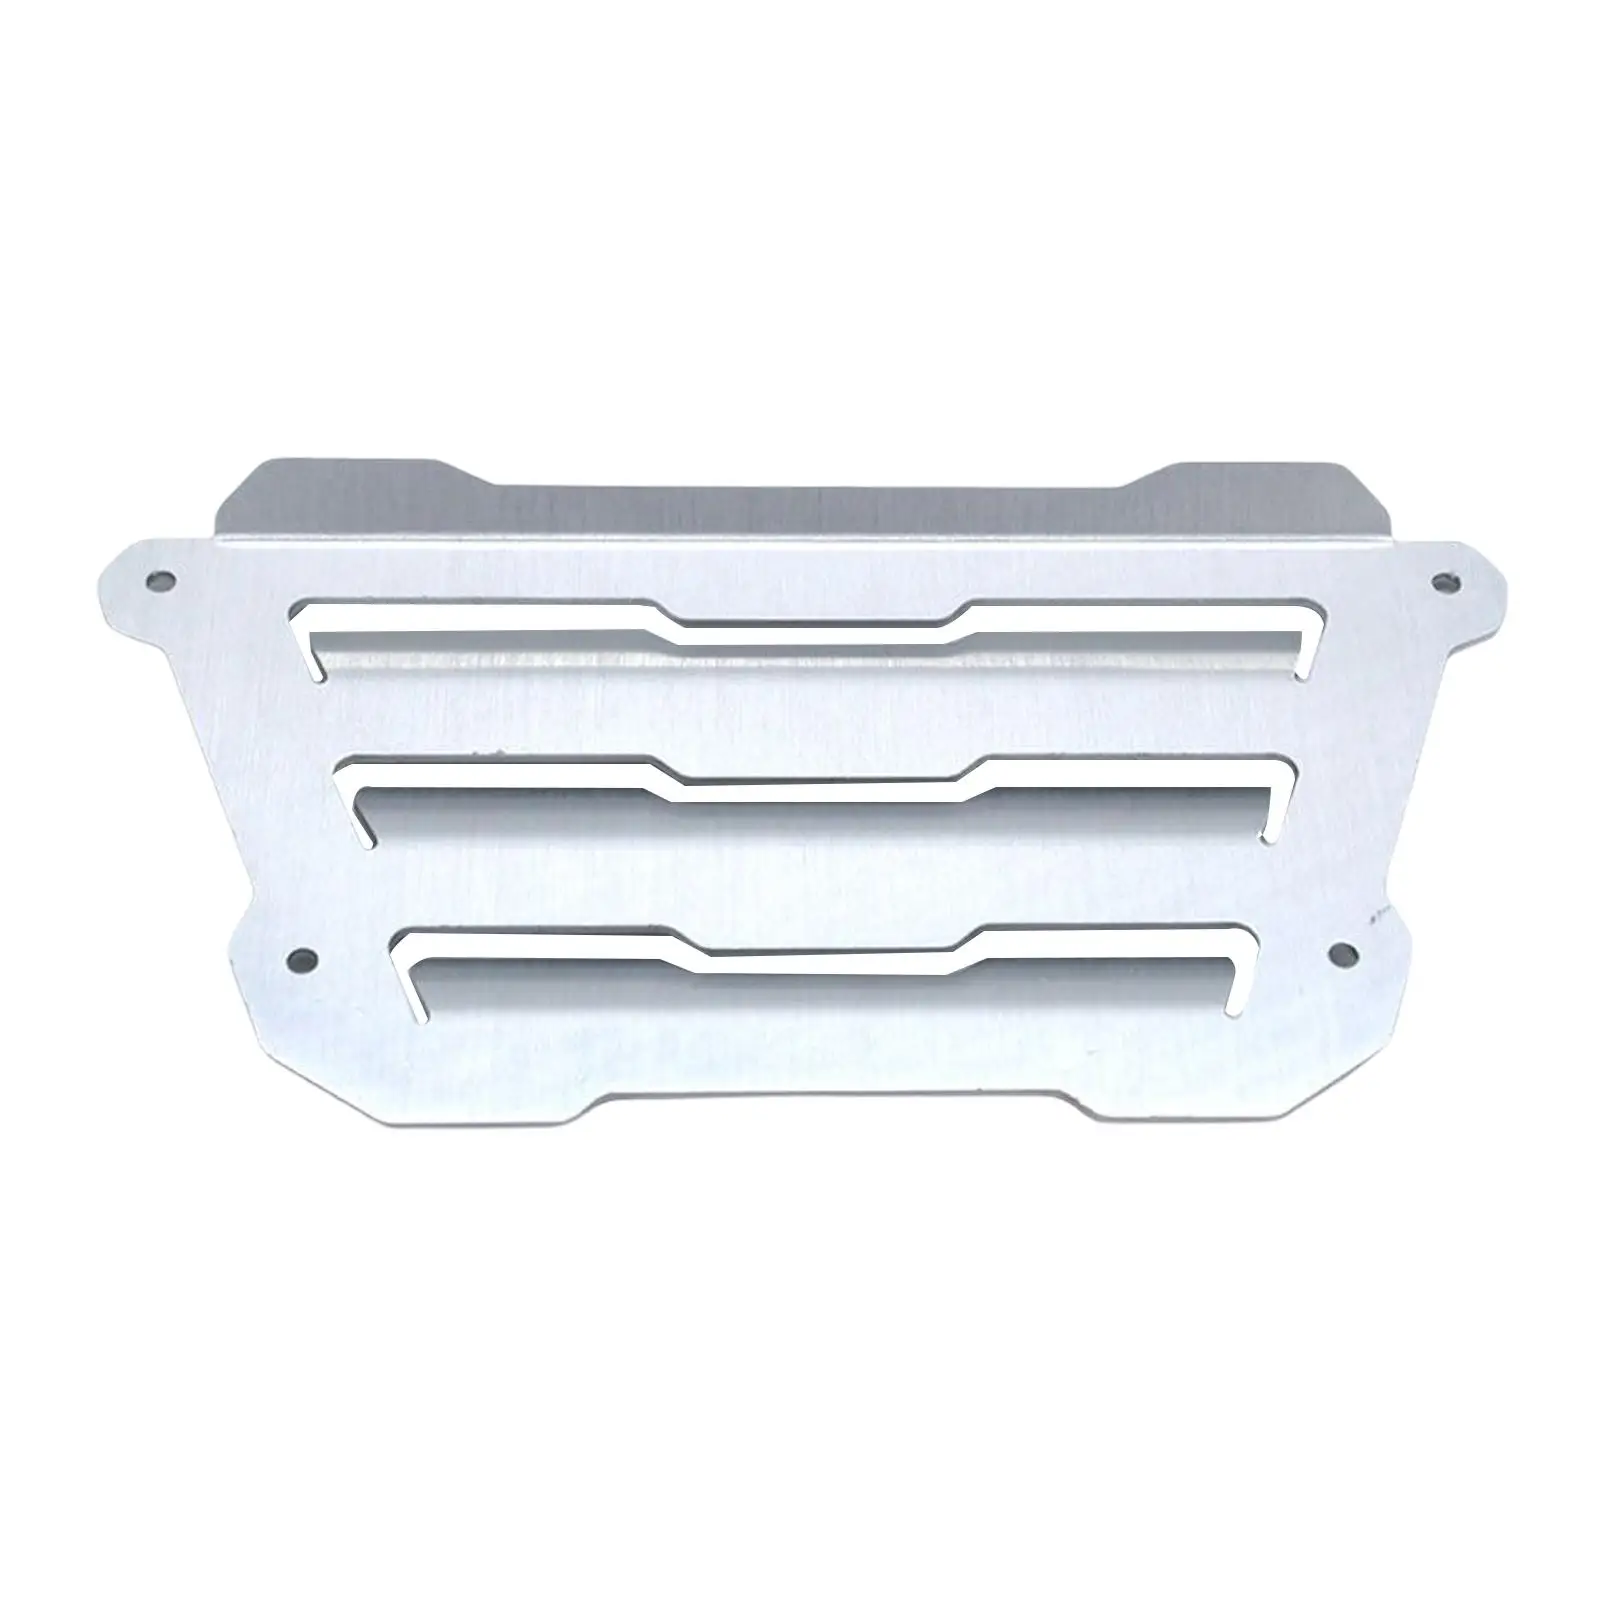  Engine Guard Cover Protector, for  Norden 901 Replace ACC